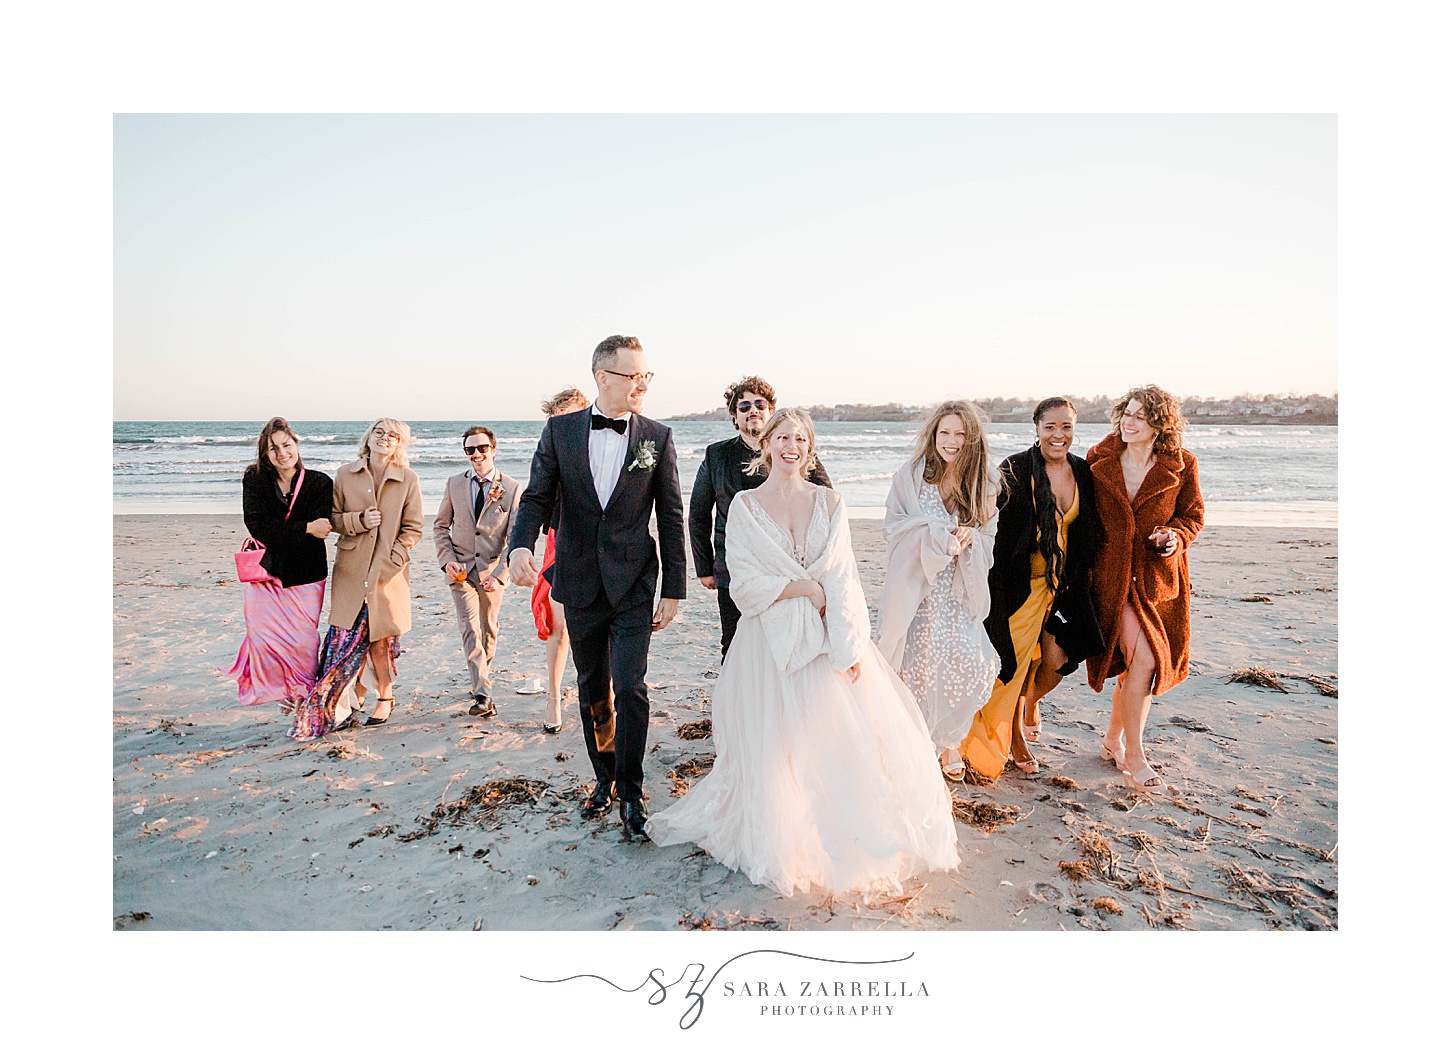 newlyweds walk on beach with wedding party in mismatched gowns